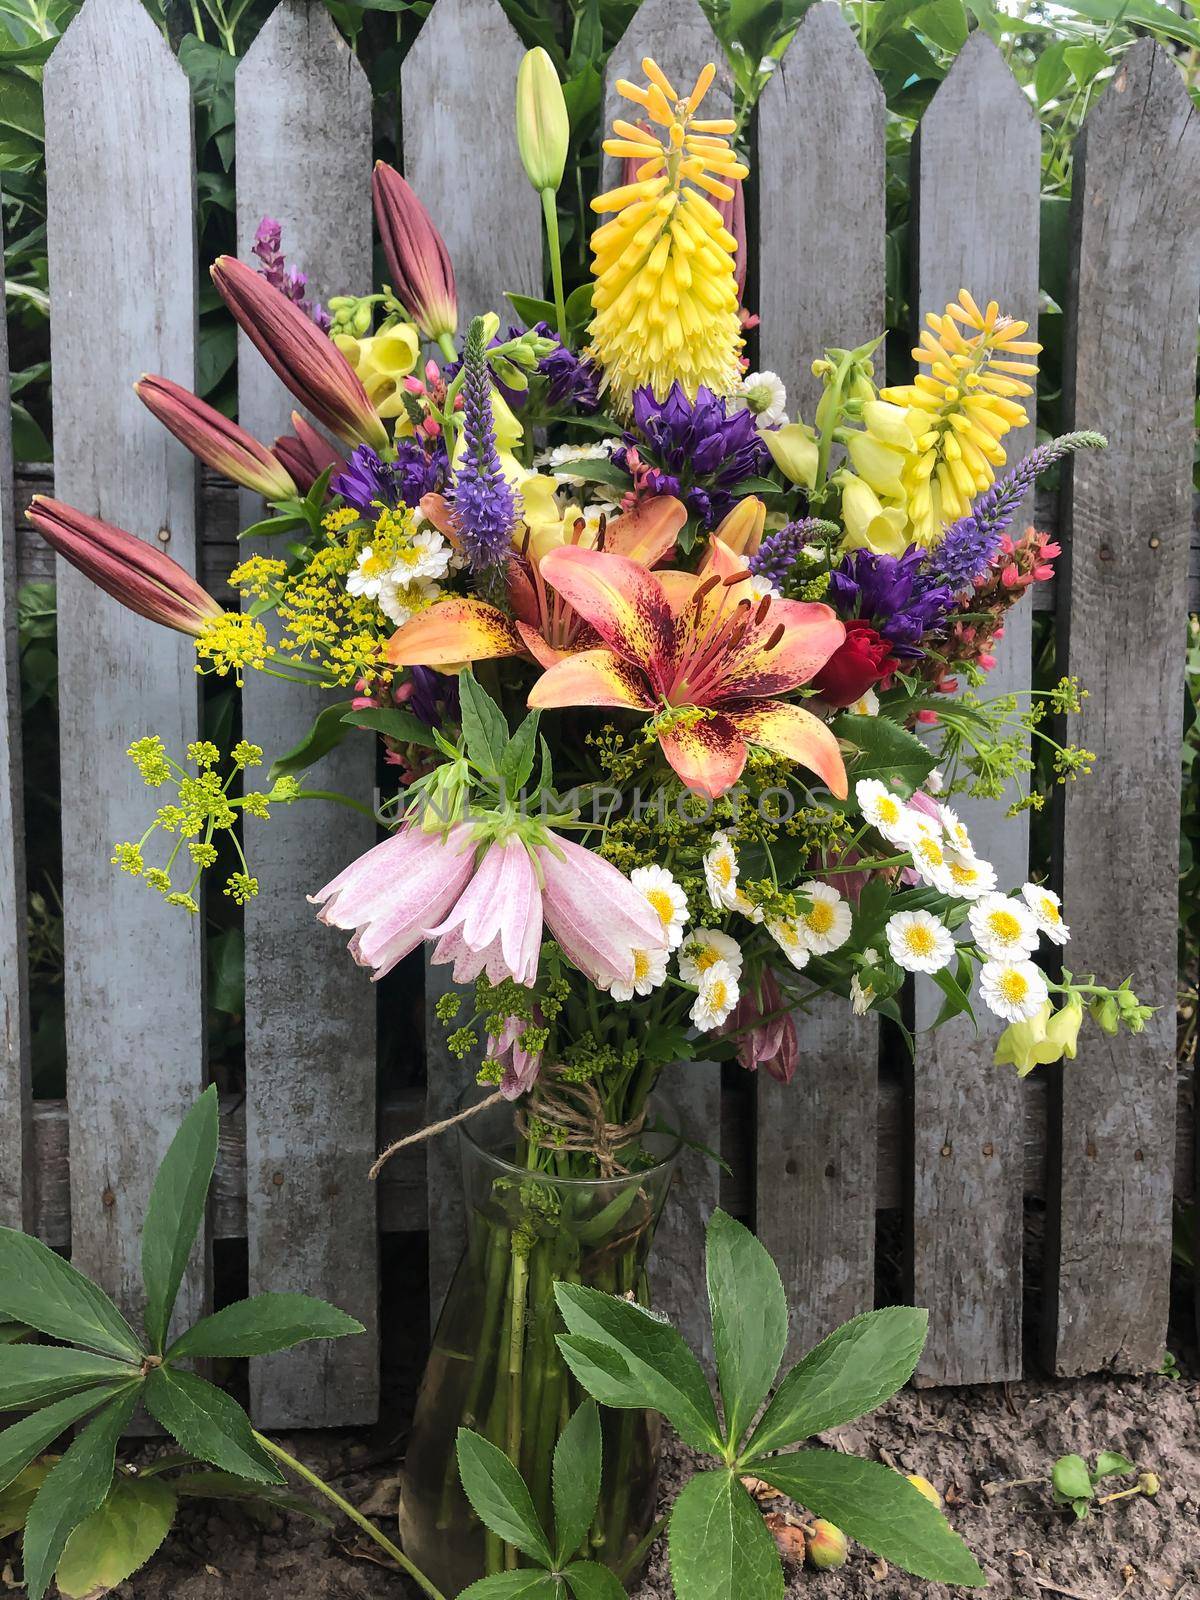 Bouquet with lilies. Home decor and flowers arranging.